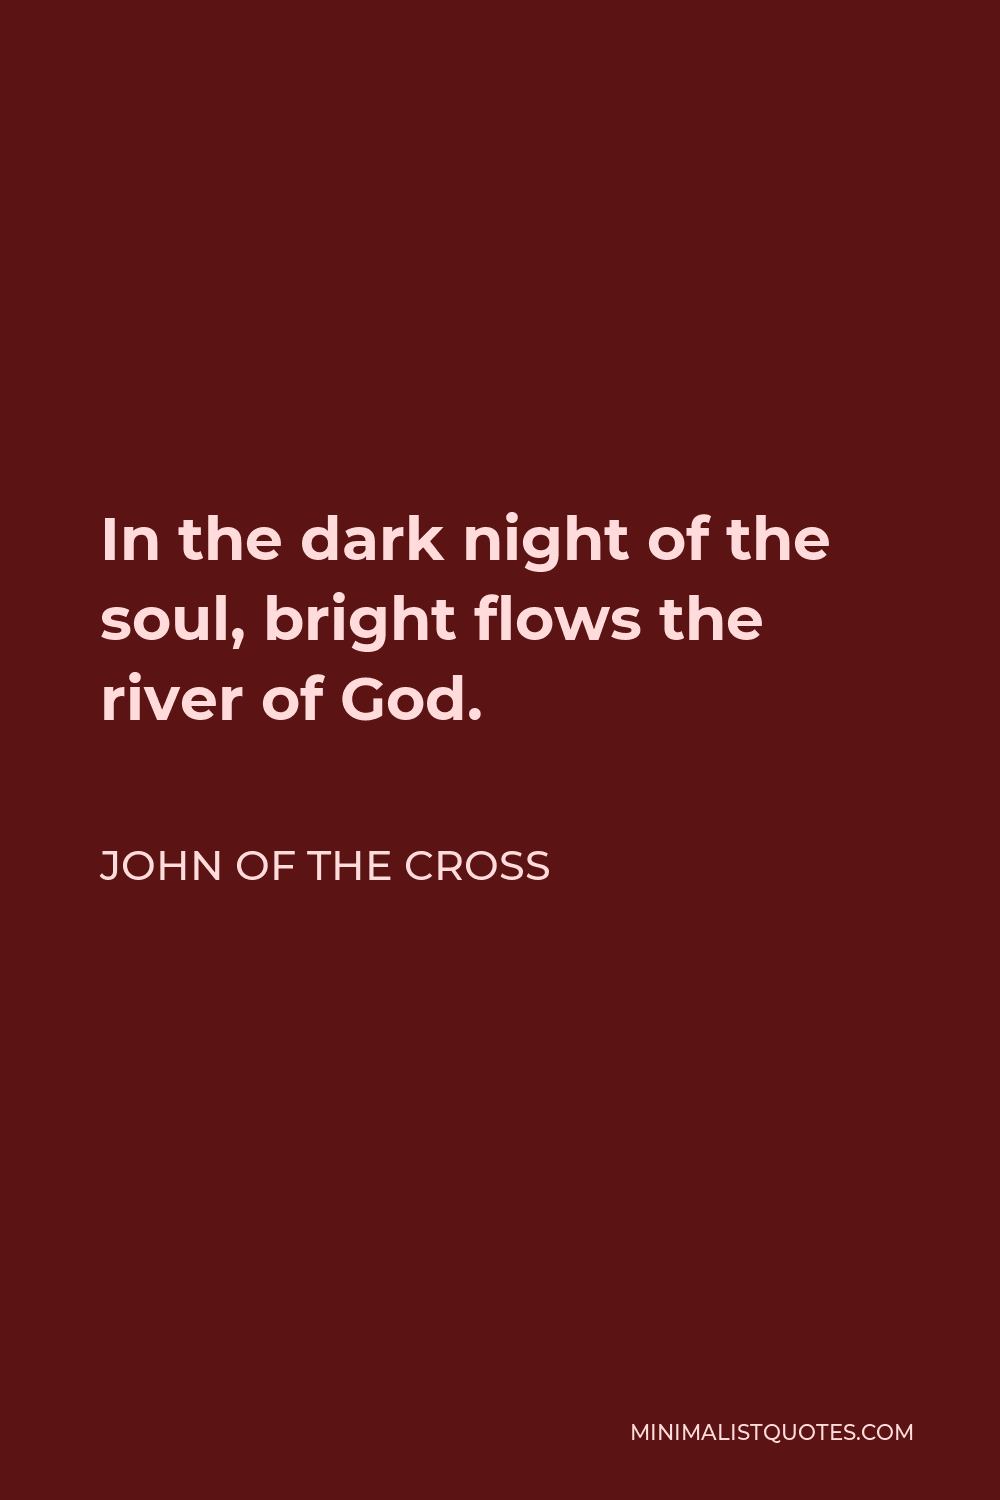 John of the Cross Quote - In the dark night of the soul, bright flows the river of God.